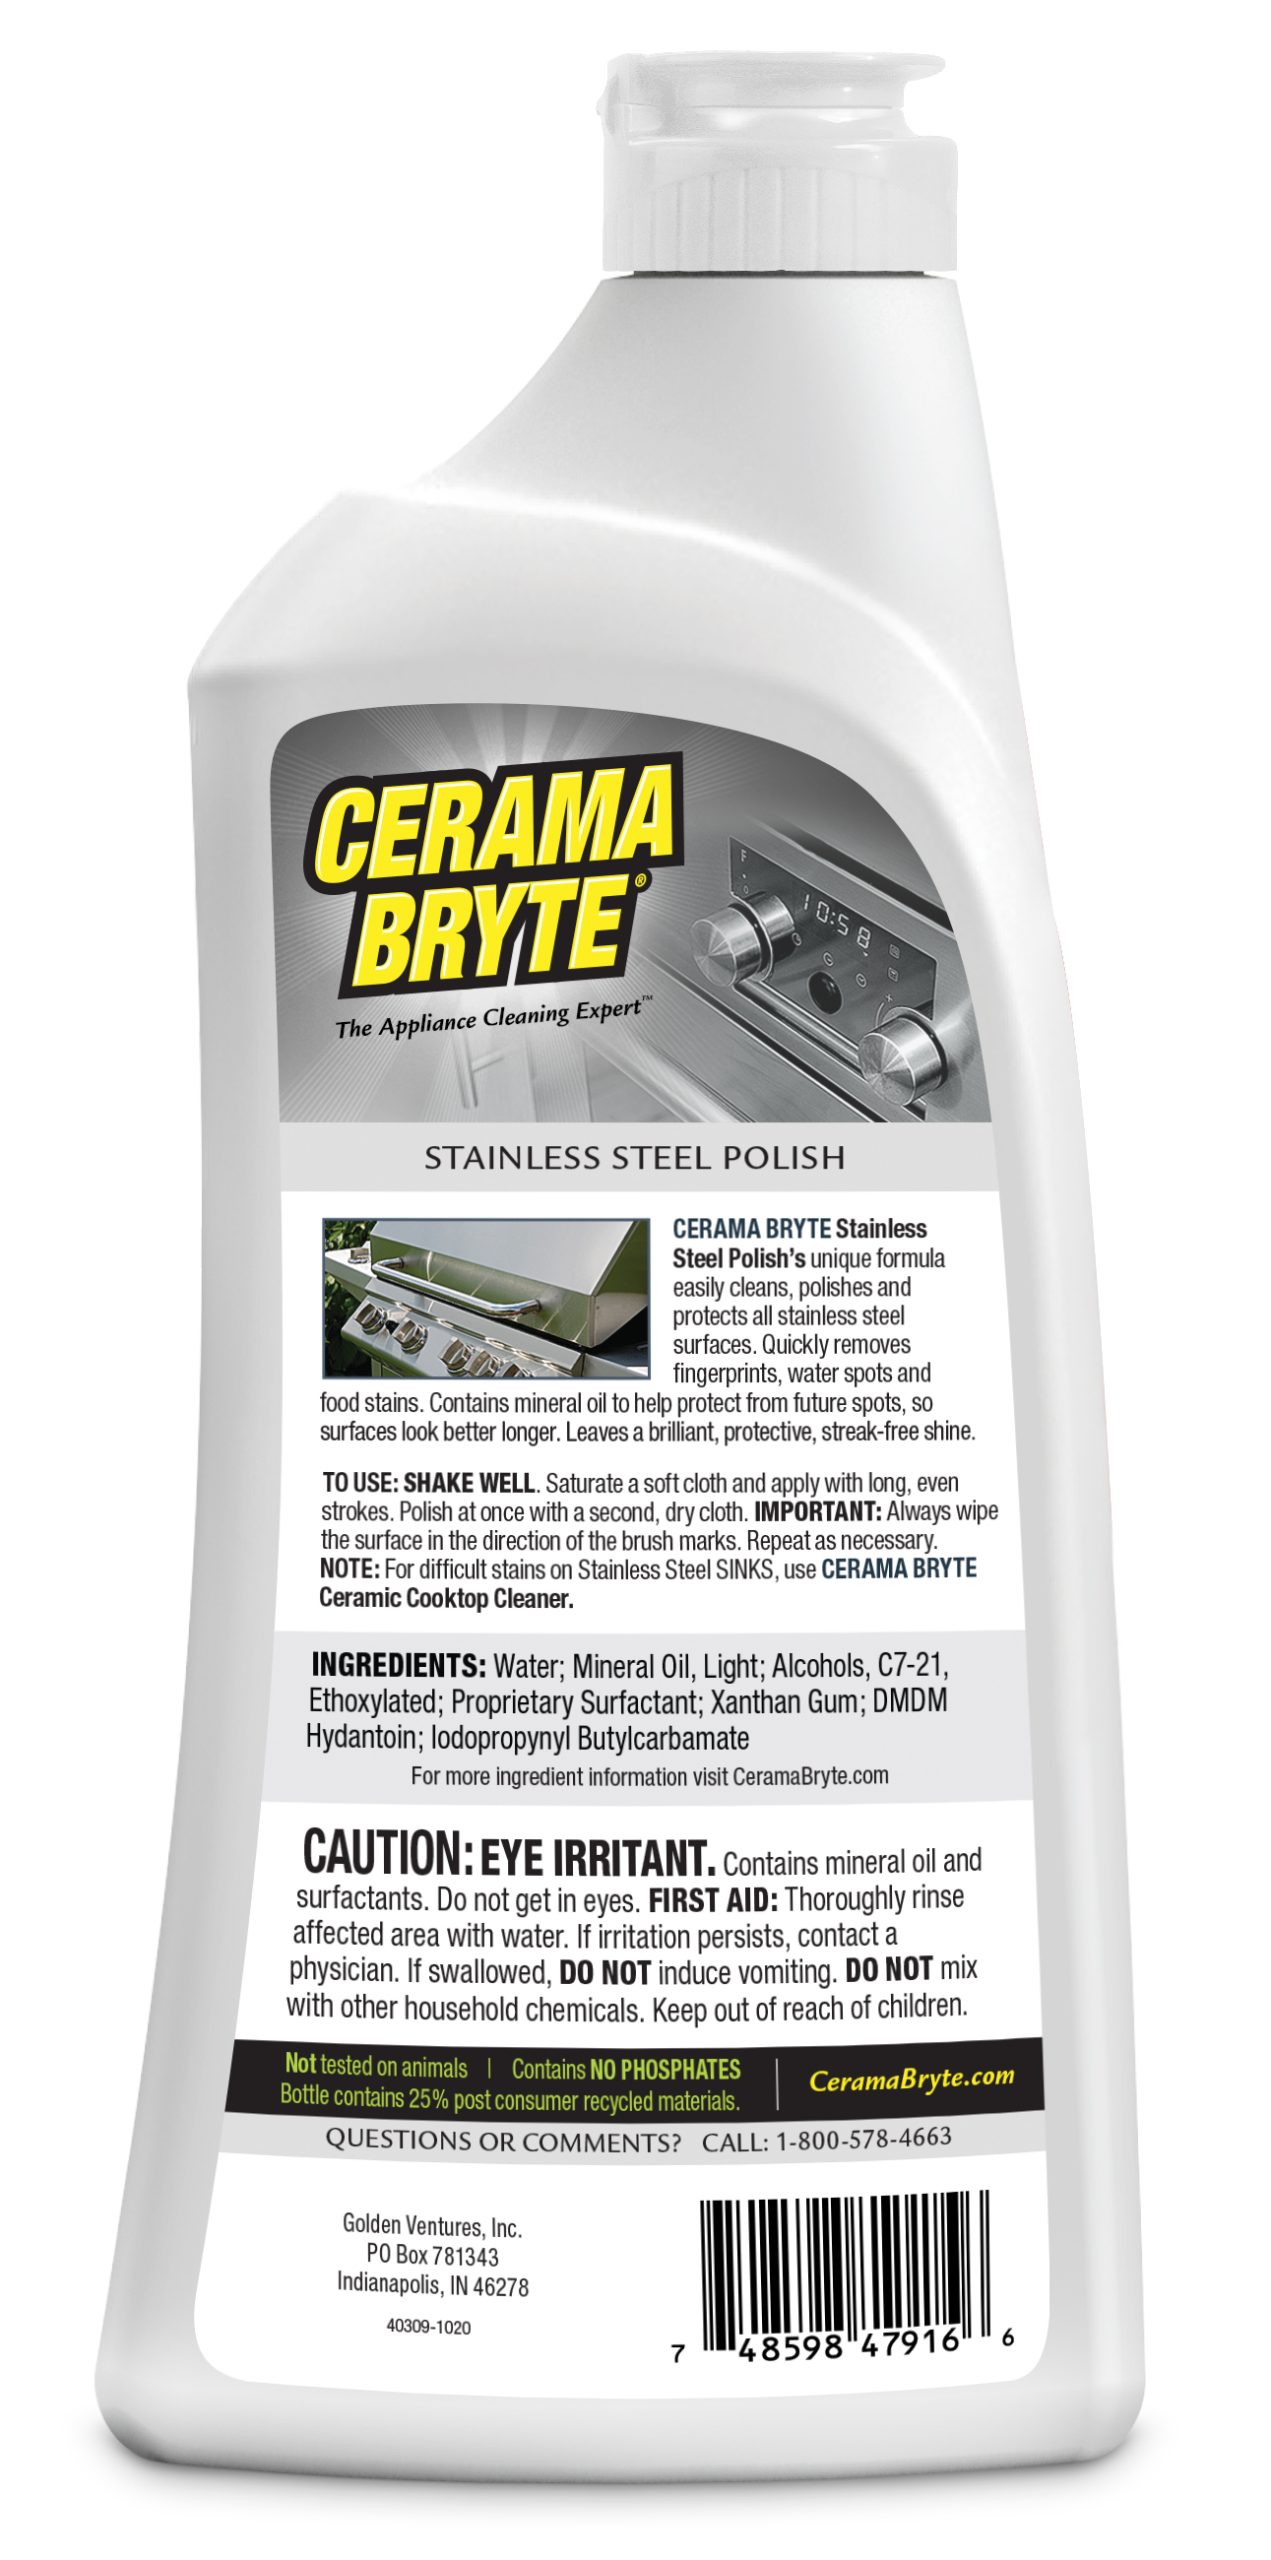 Stainless Steel Polish (with cap) - Cerama Bryte